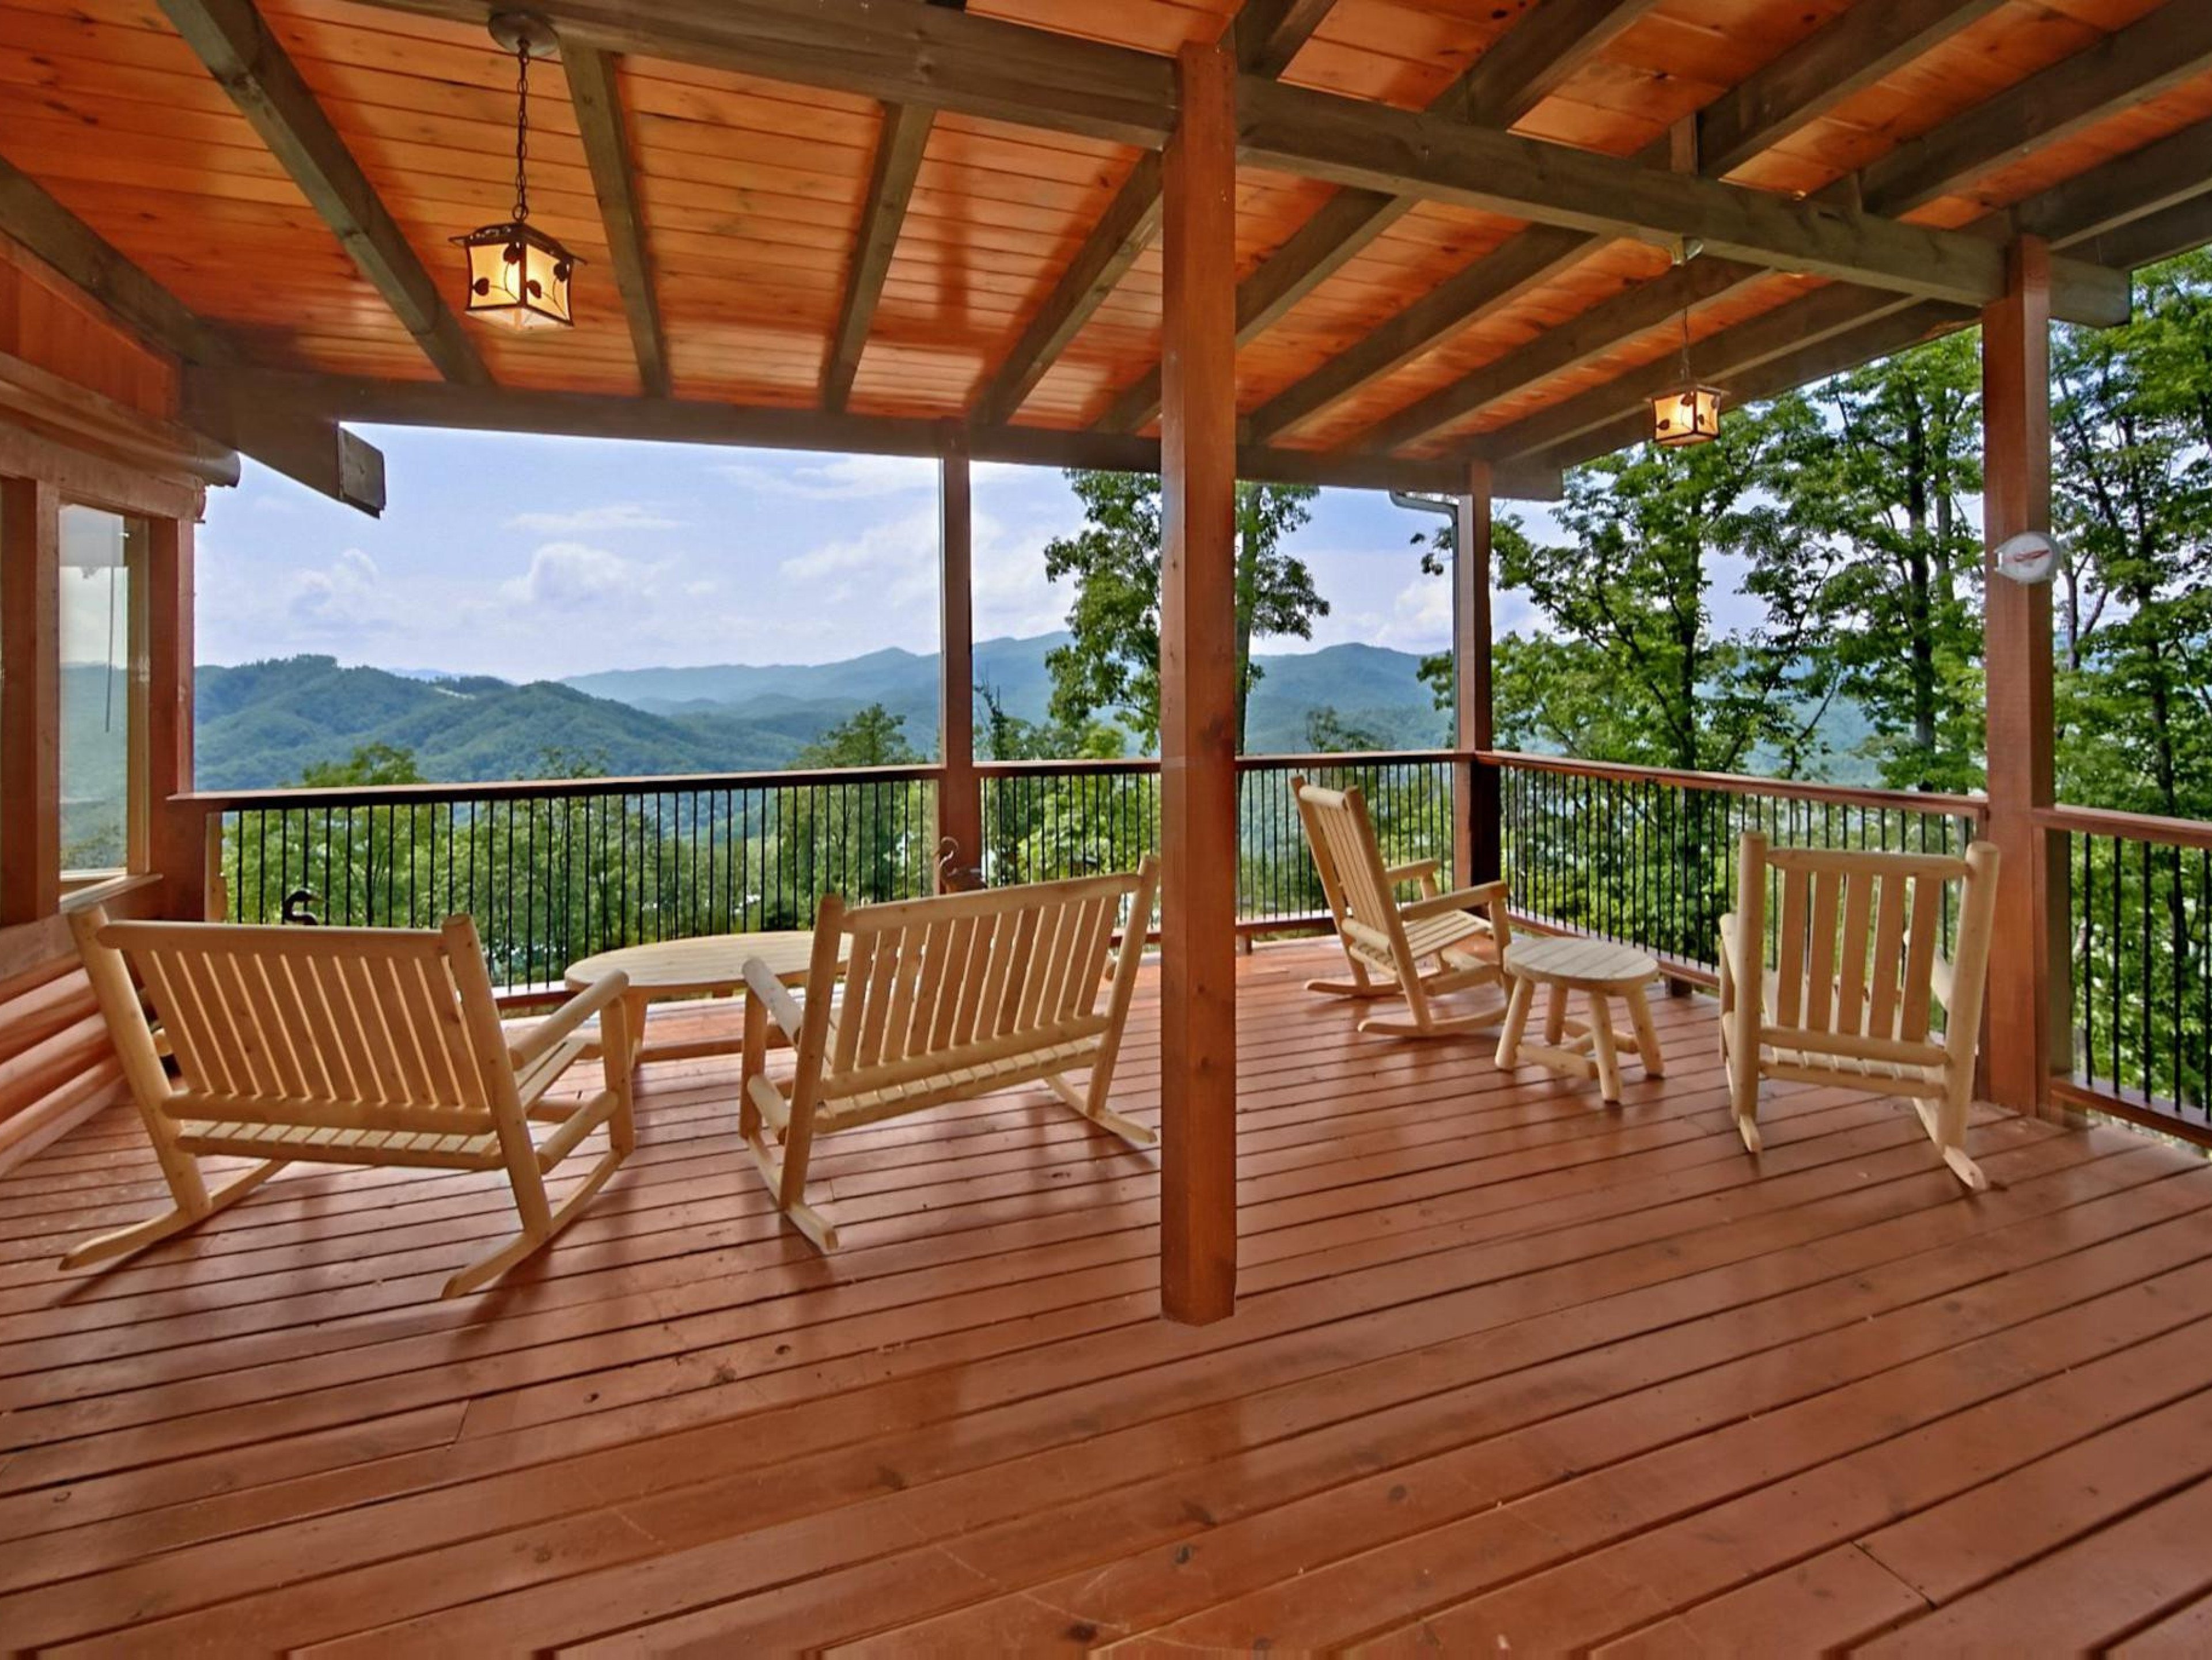 Wears Valley 16 cabin in Tennessee